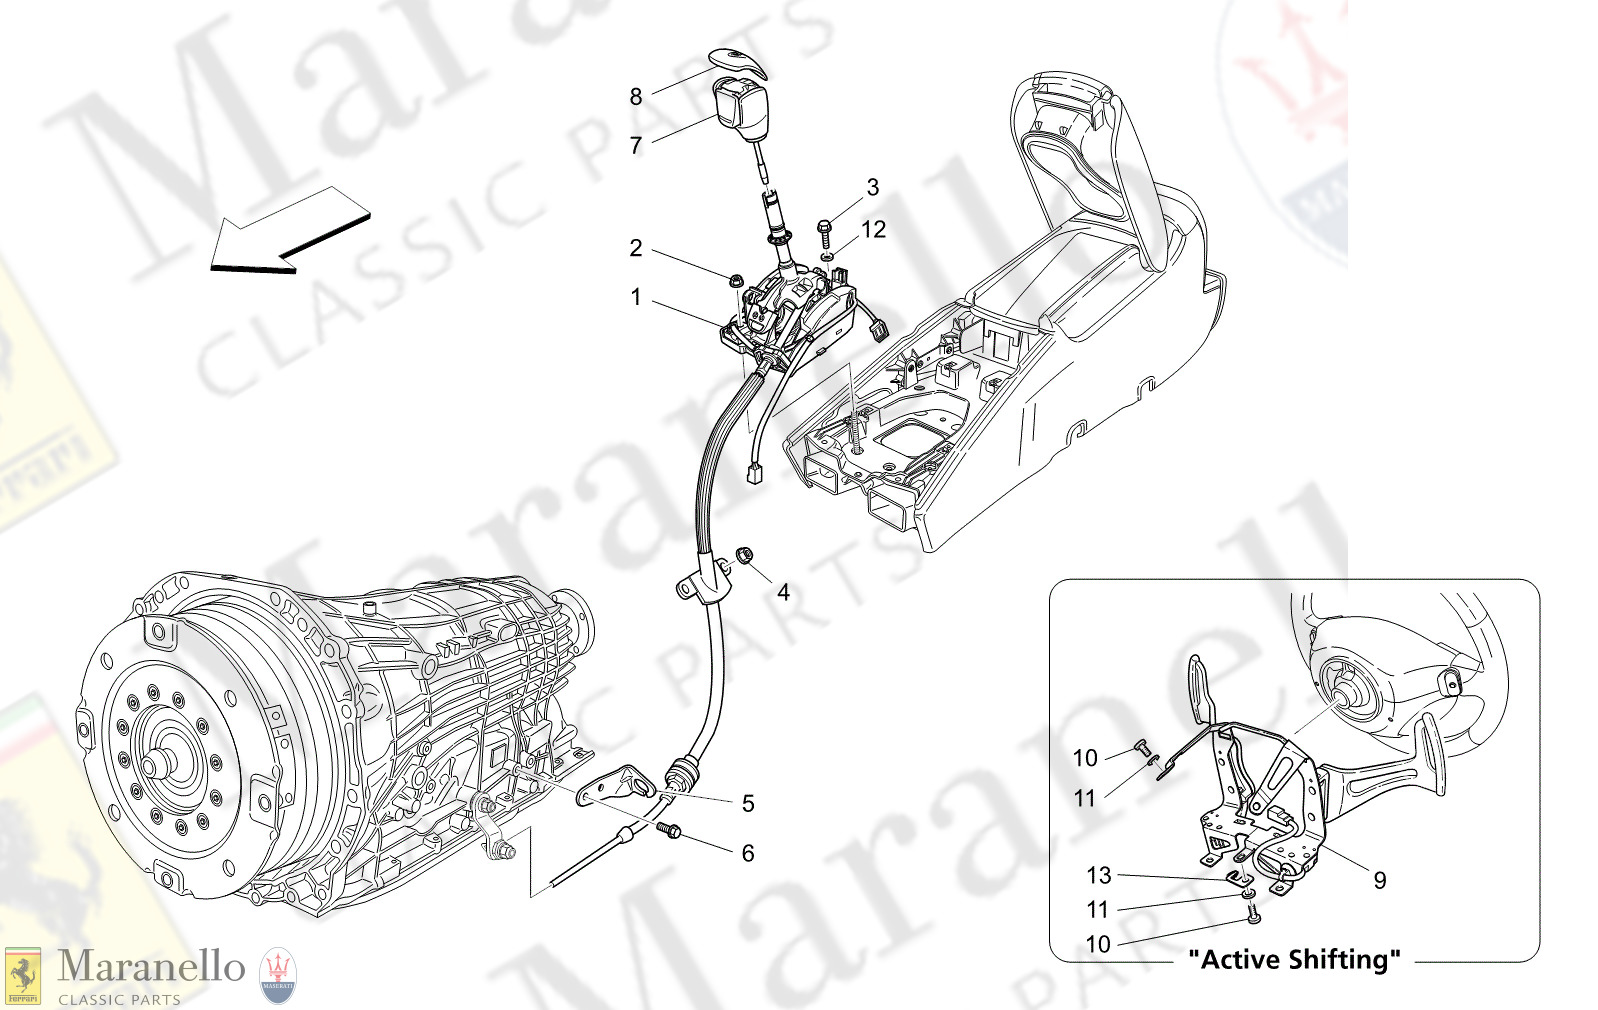 03.02 - 1 - 0302 - 1 Driver Controls For Automatic Gearbox